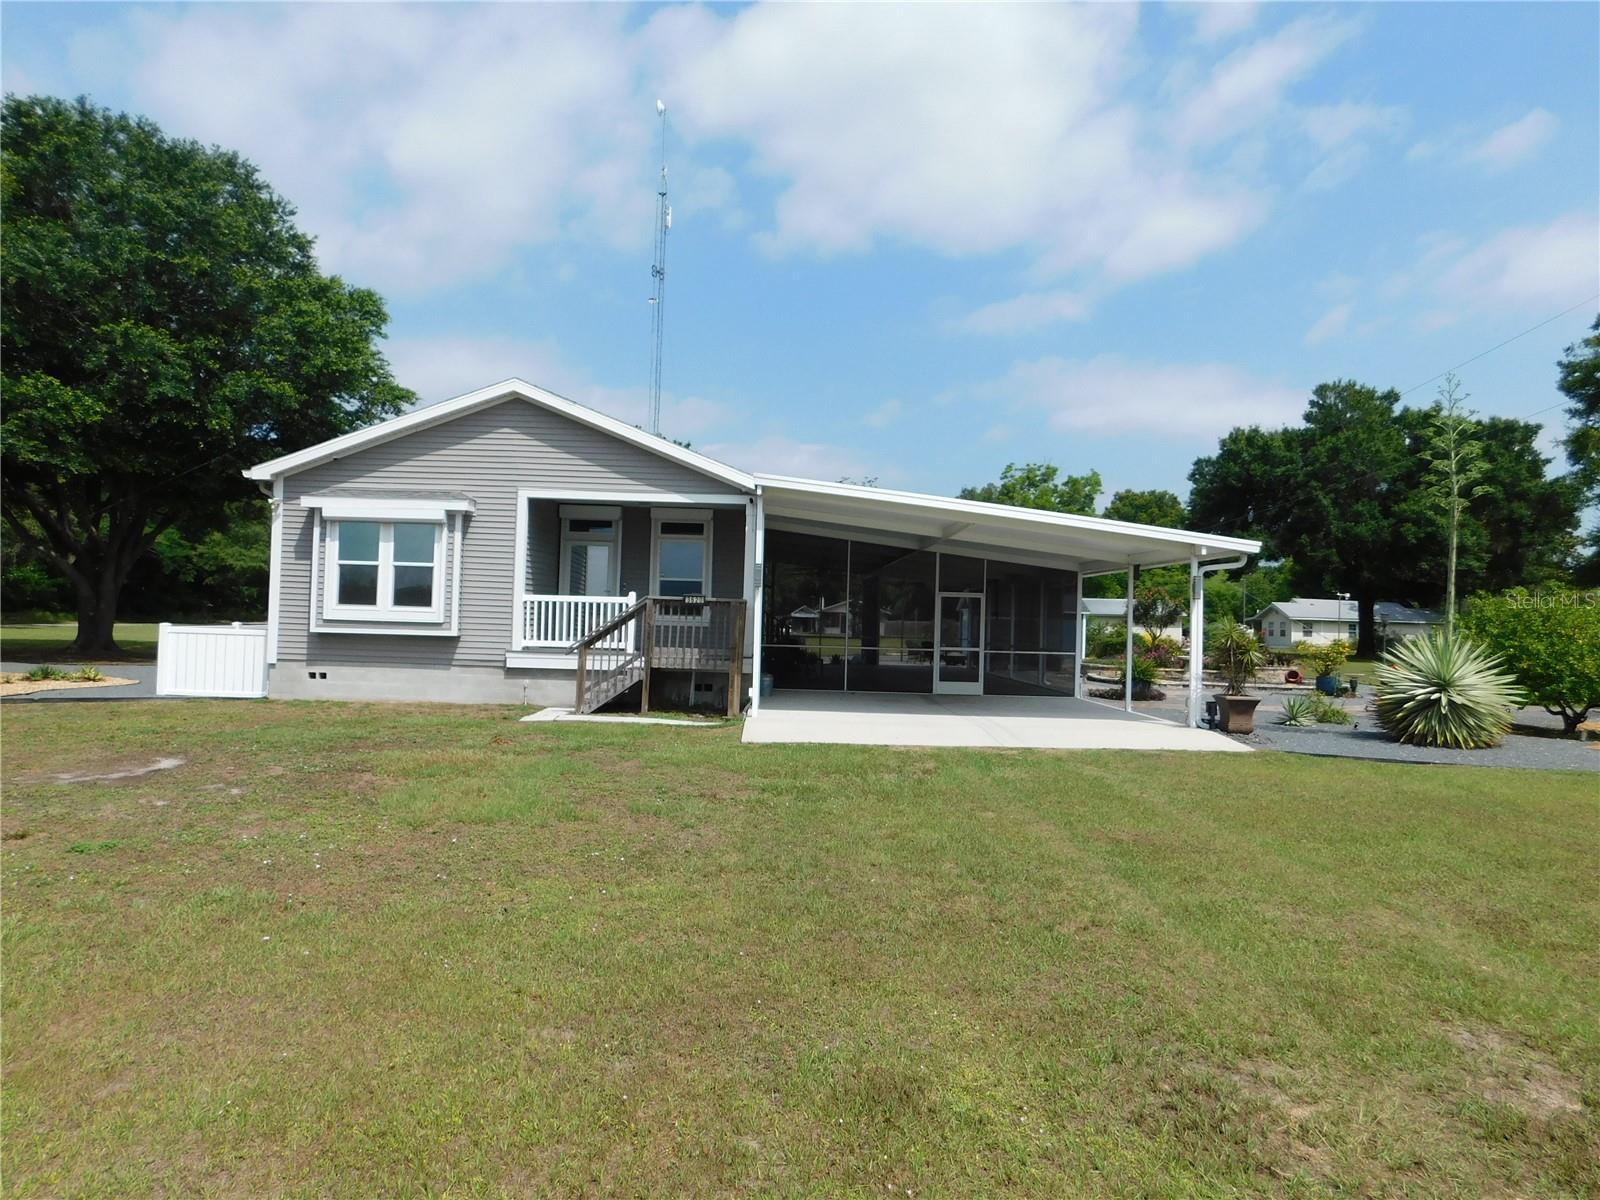 3620 FERRY, LAKE WALES, Modular Home,  for sale, Crosby and Associates Inc